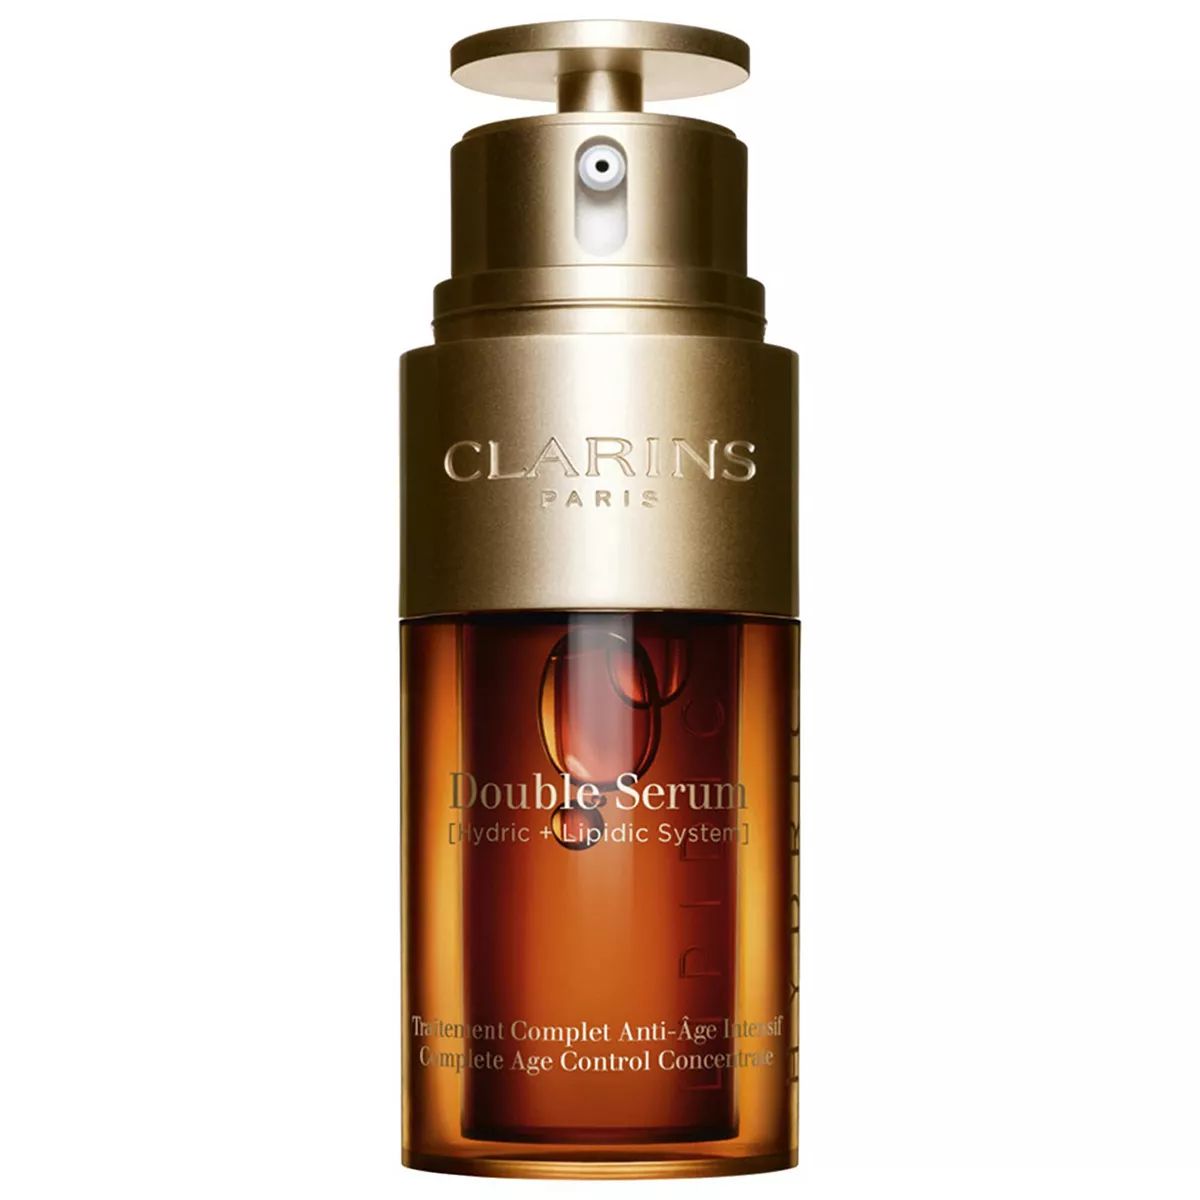 Clarins Double Serum Firming & Smoothing Anti-Aging Concentrate | Kohl's